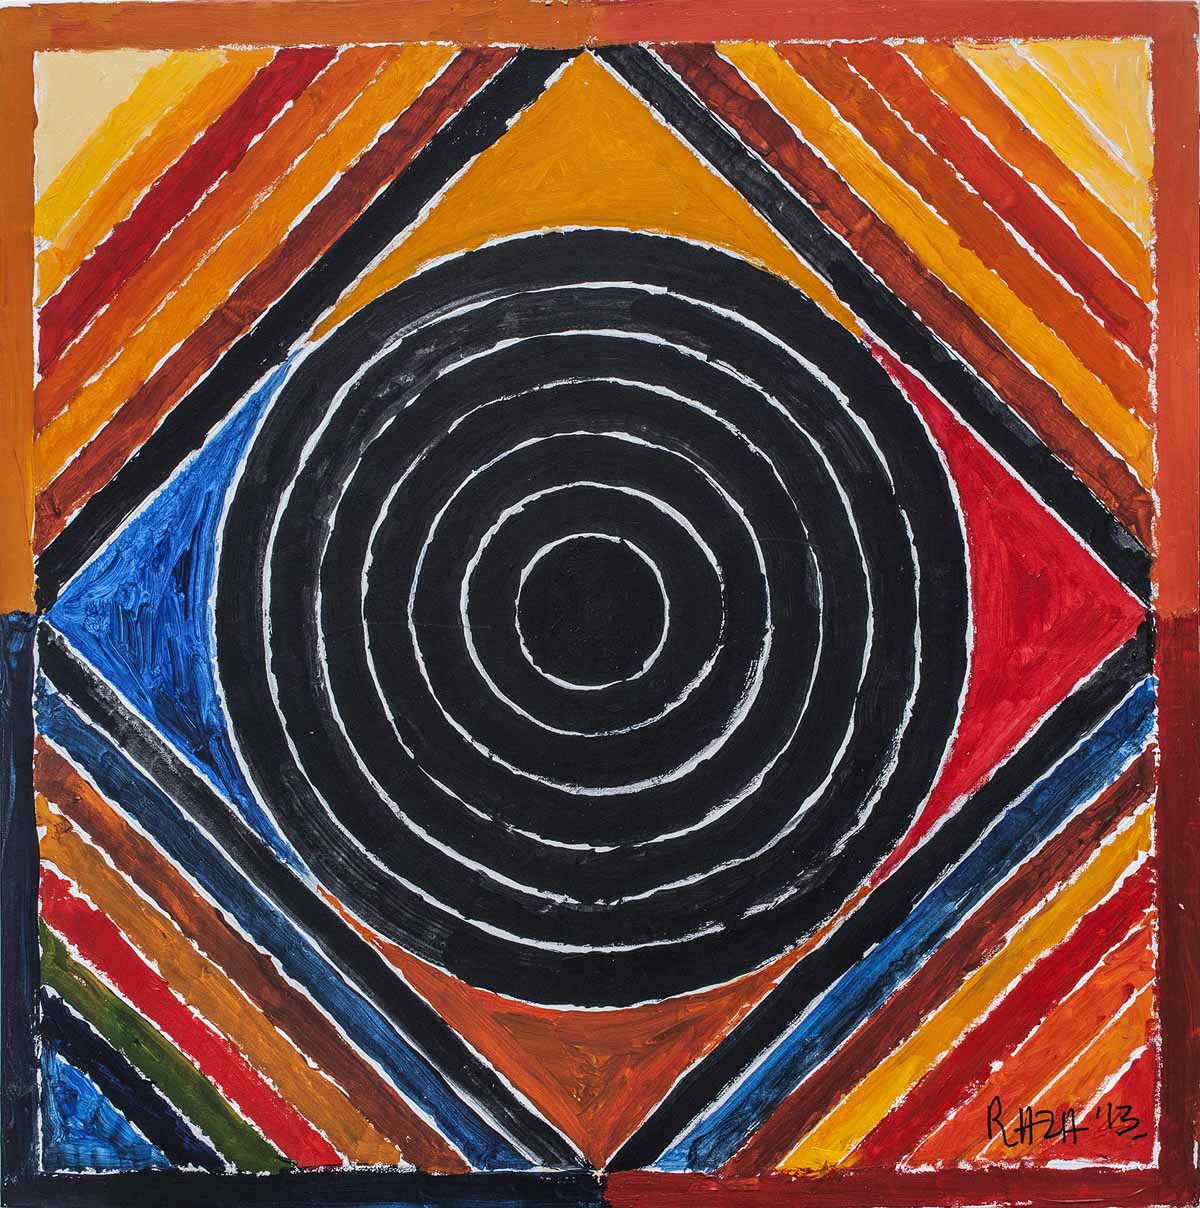 expensive painting geometric by famous indian artist syed haider raza